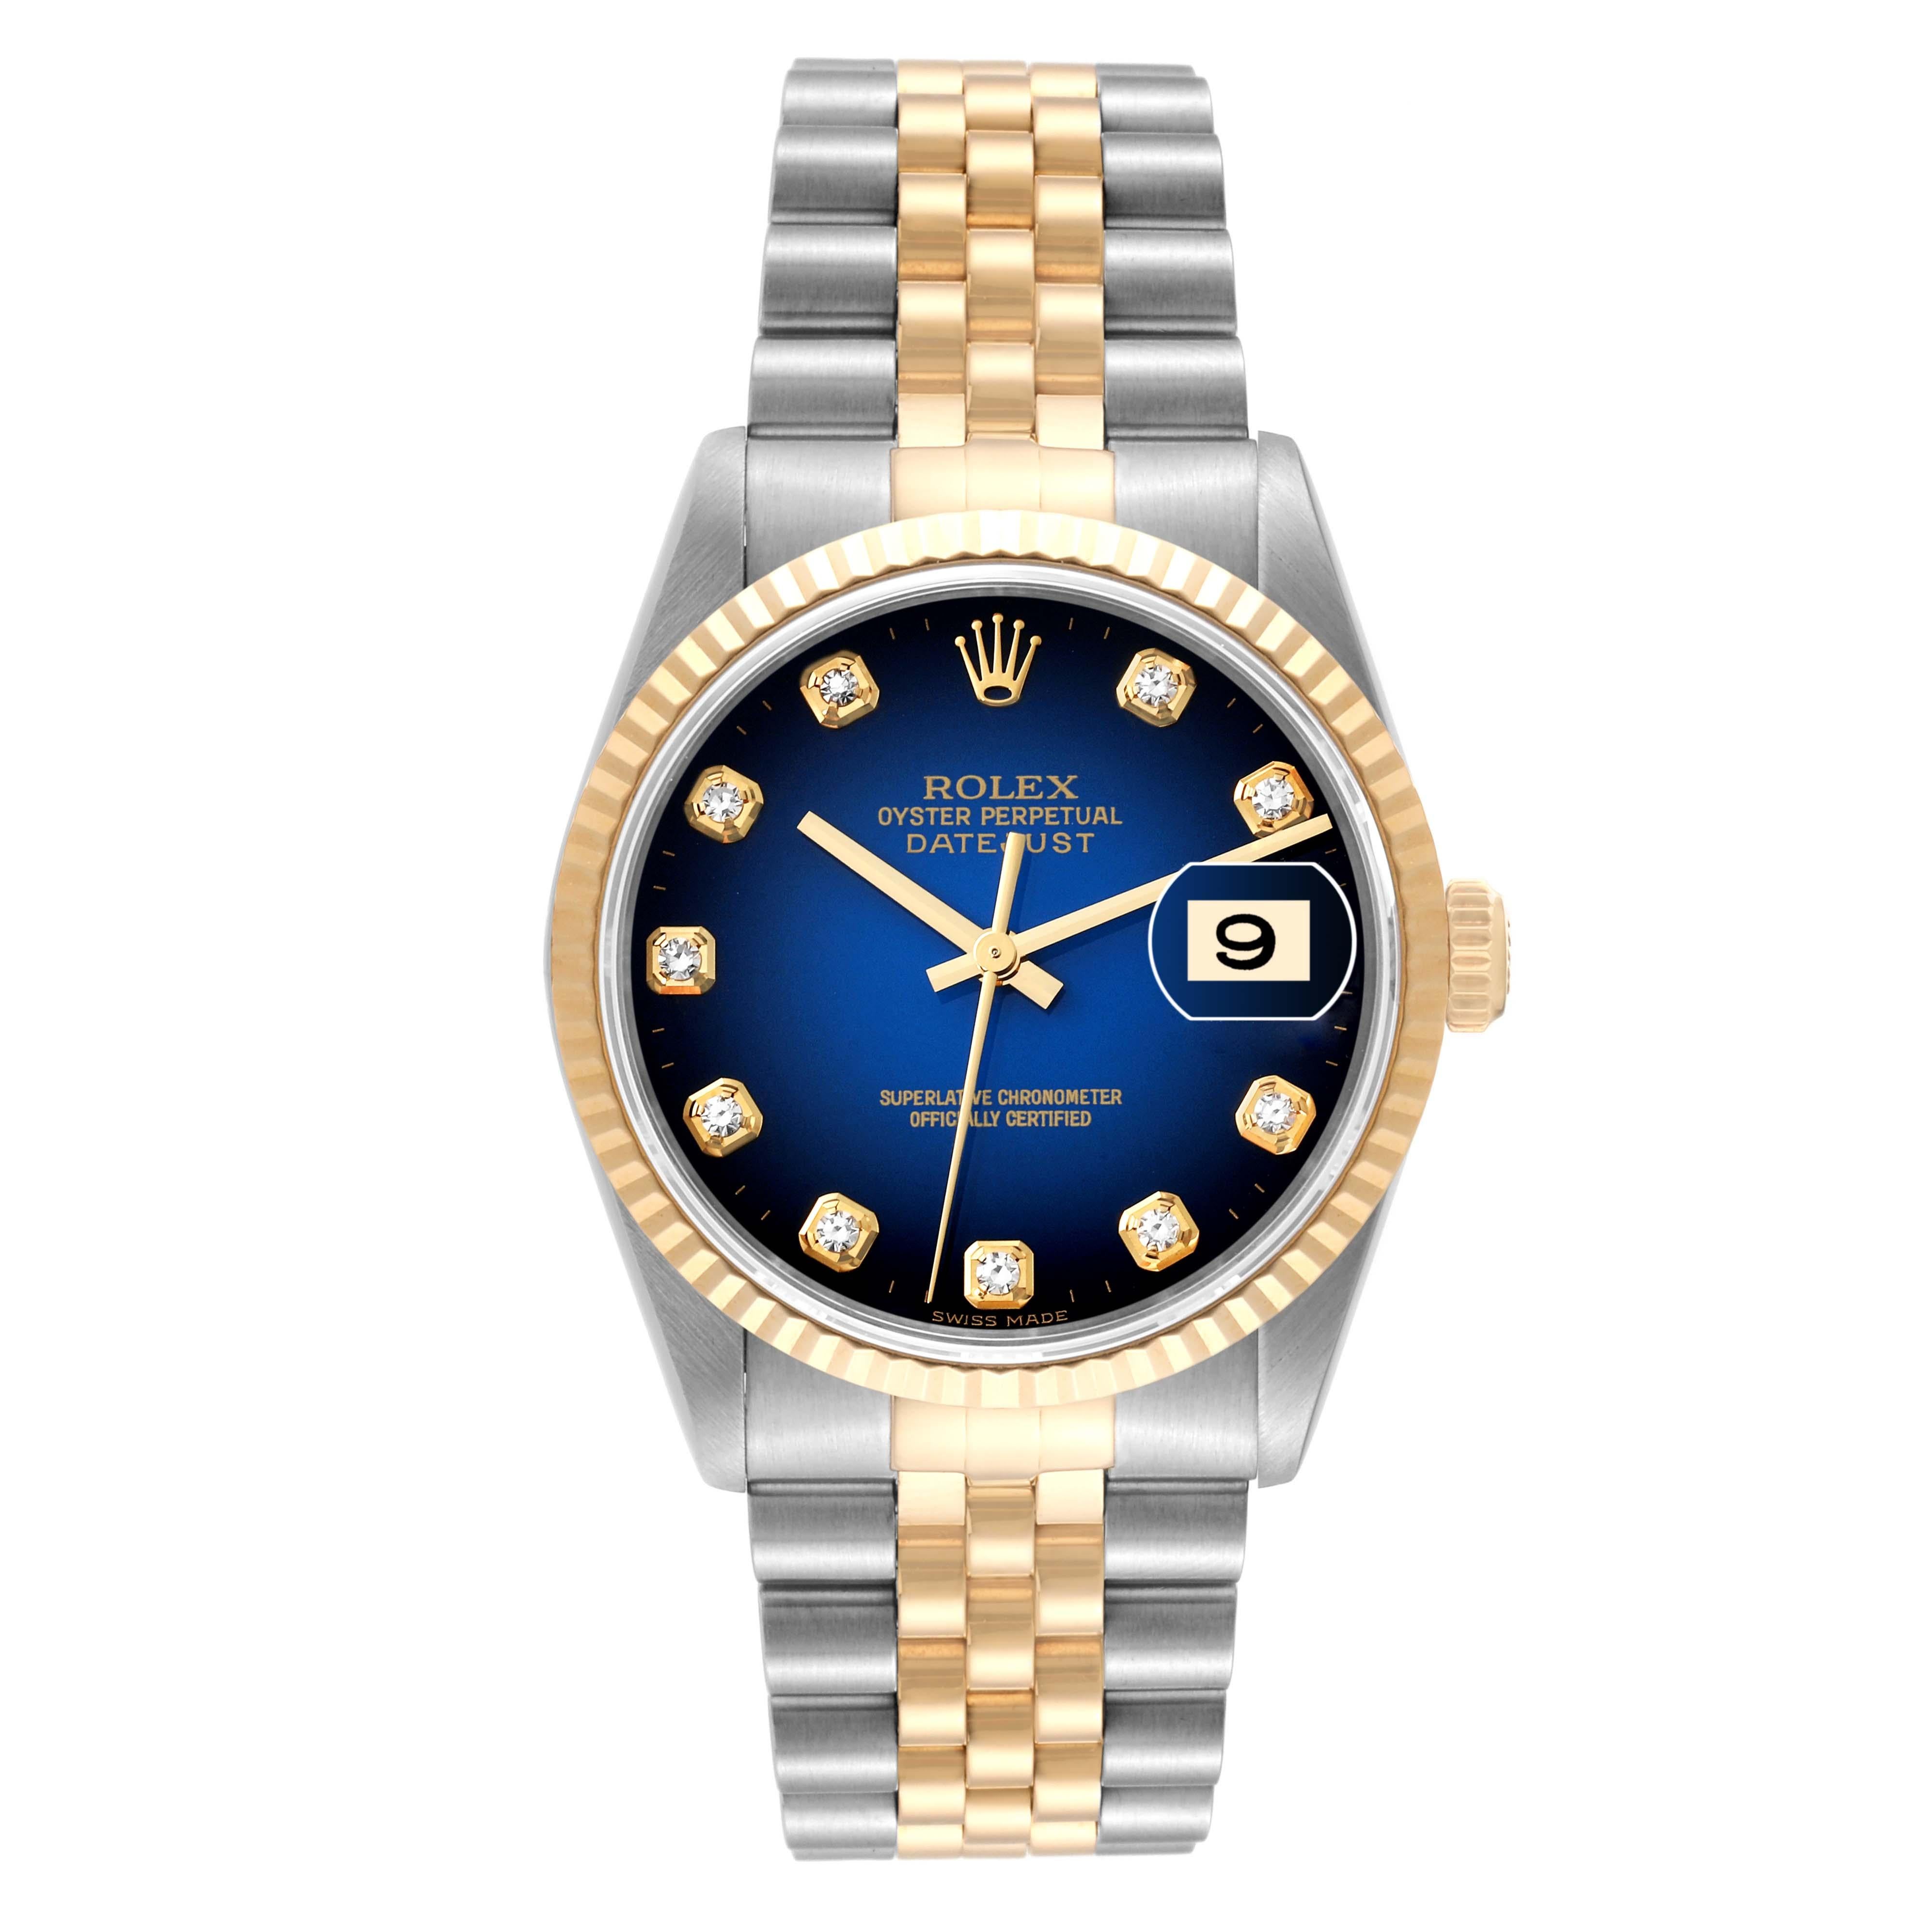 Rolex Datejust Blue Vignette Diamond Dial Steel Yellow Gold Mens Watch 16233. Officially certified chronometer automatic self-winding movement. Stainless steel case 36.0 mm in diameter.  Rolex logo on an 18K yellow gold crown. 18k yellow gold fluted